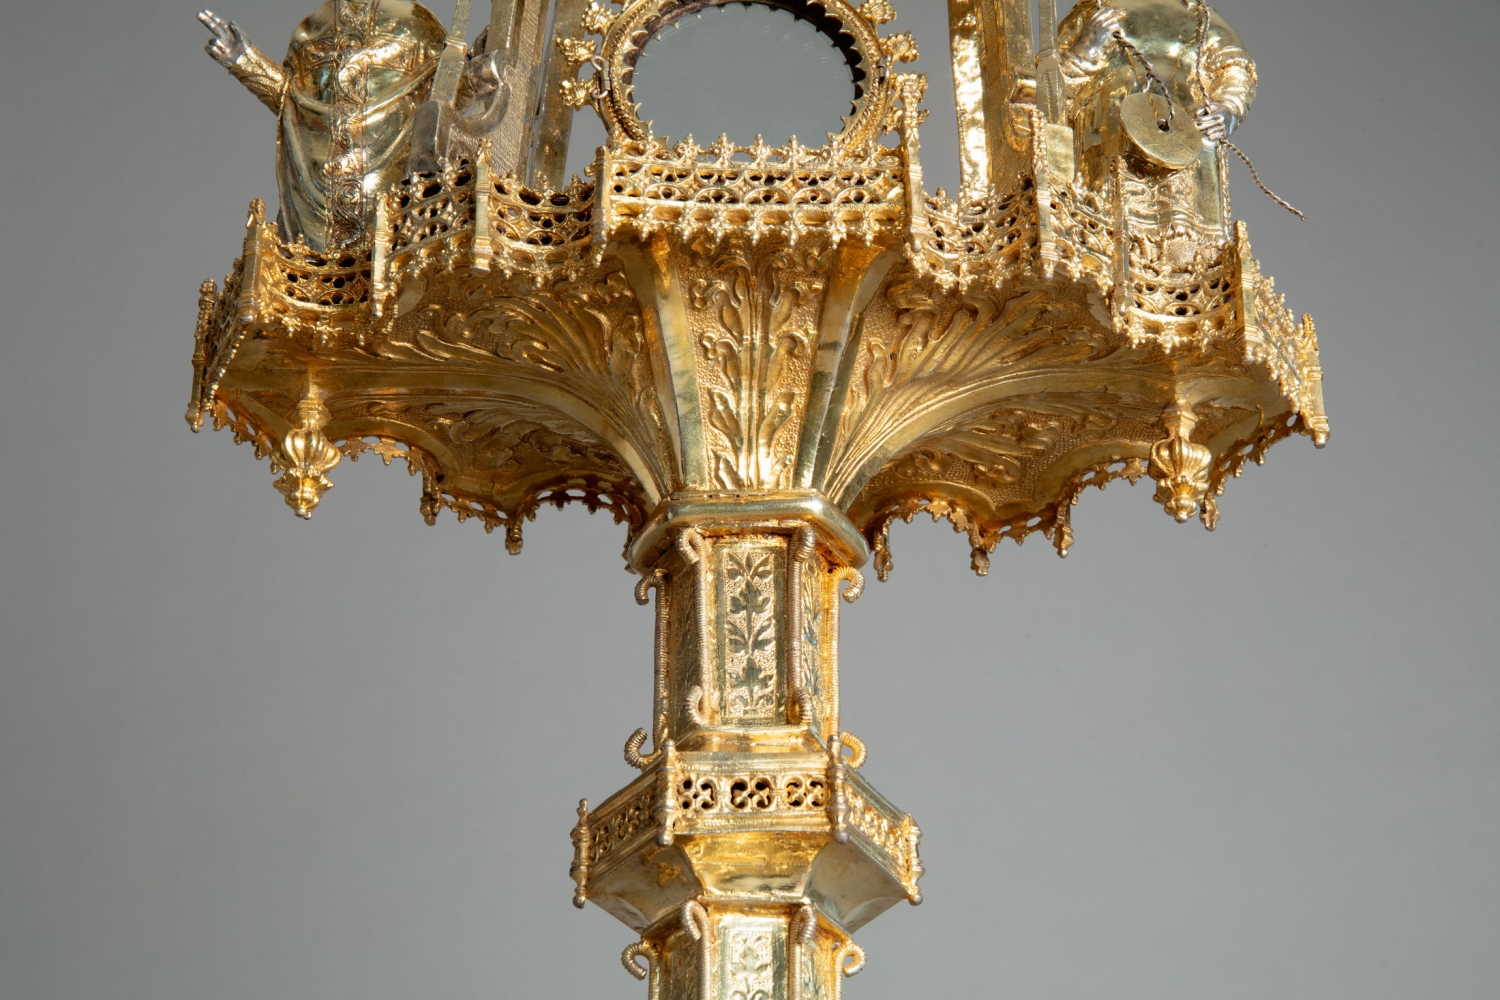 Architectural monstrance with two saints, c. 1520-1530
Spain, Barcelona
Gilded silver
24 3/4 x 11 3/4 x 8 inches
(63 x 30 x 20.3 cm)